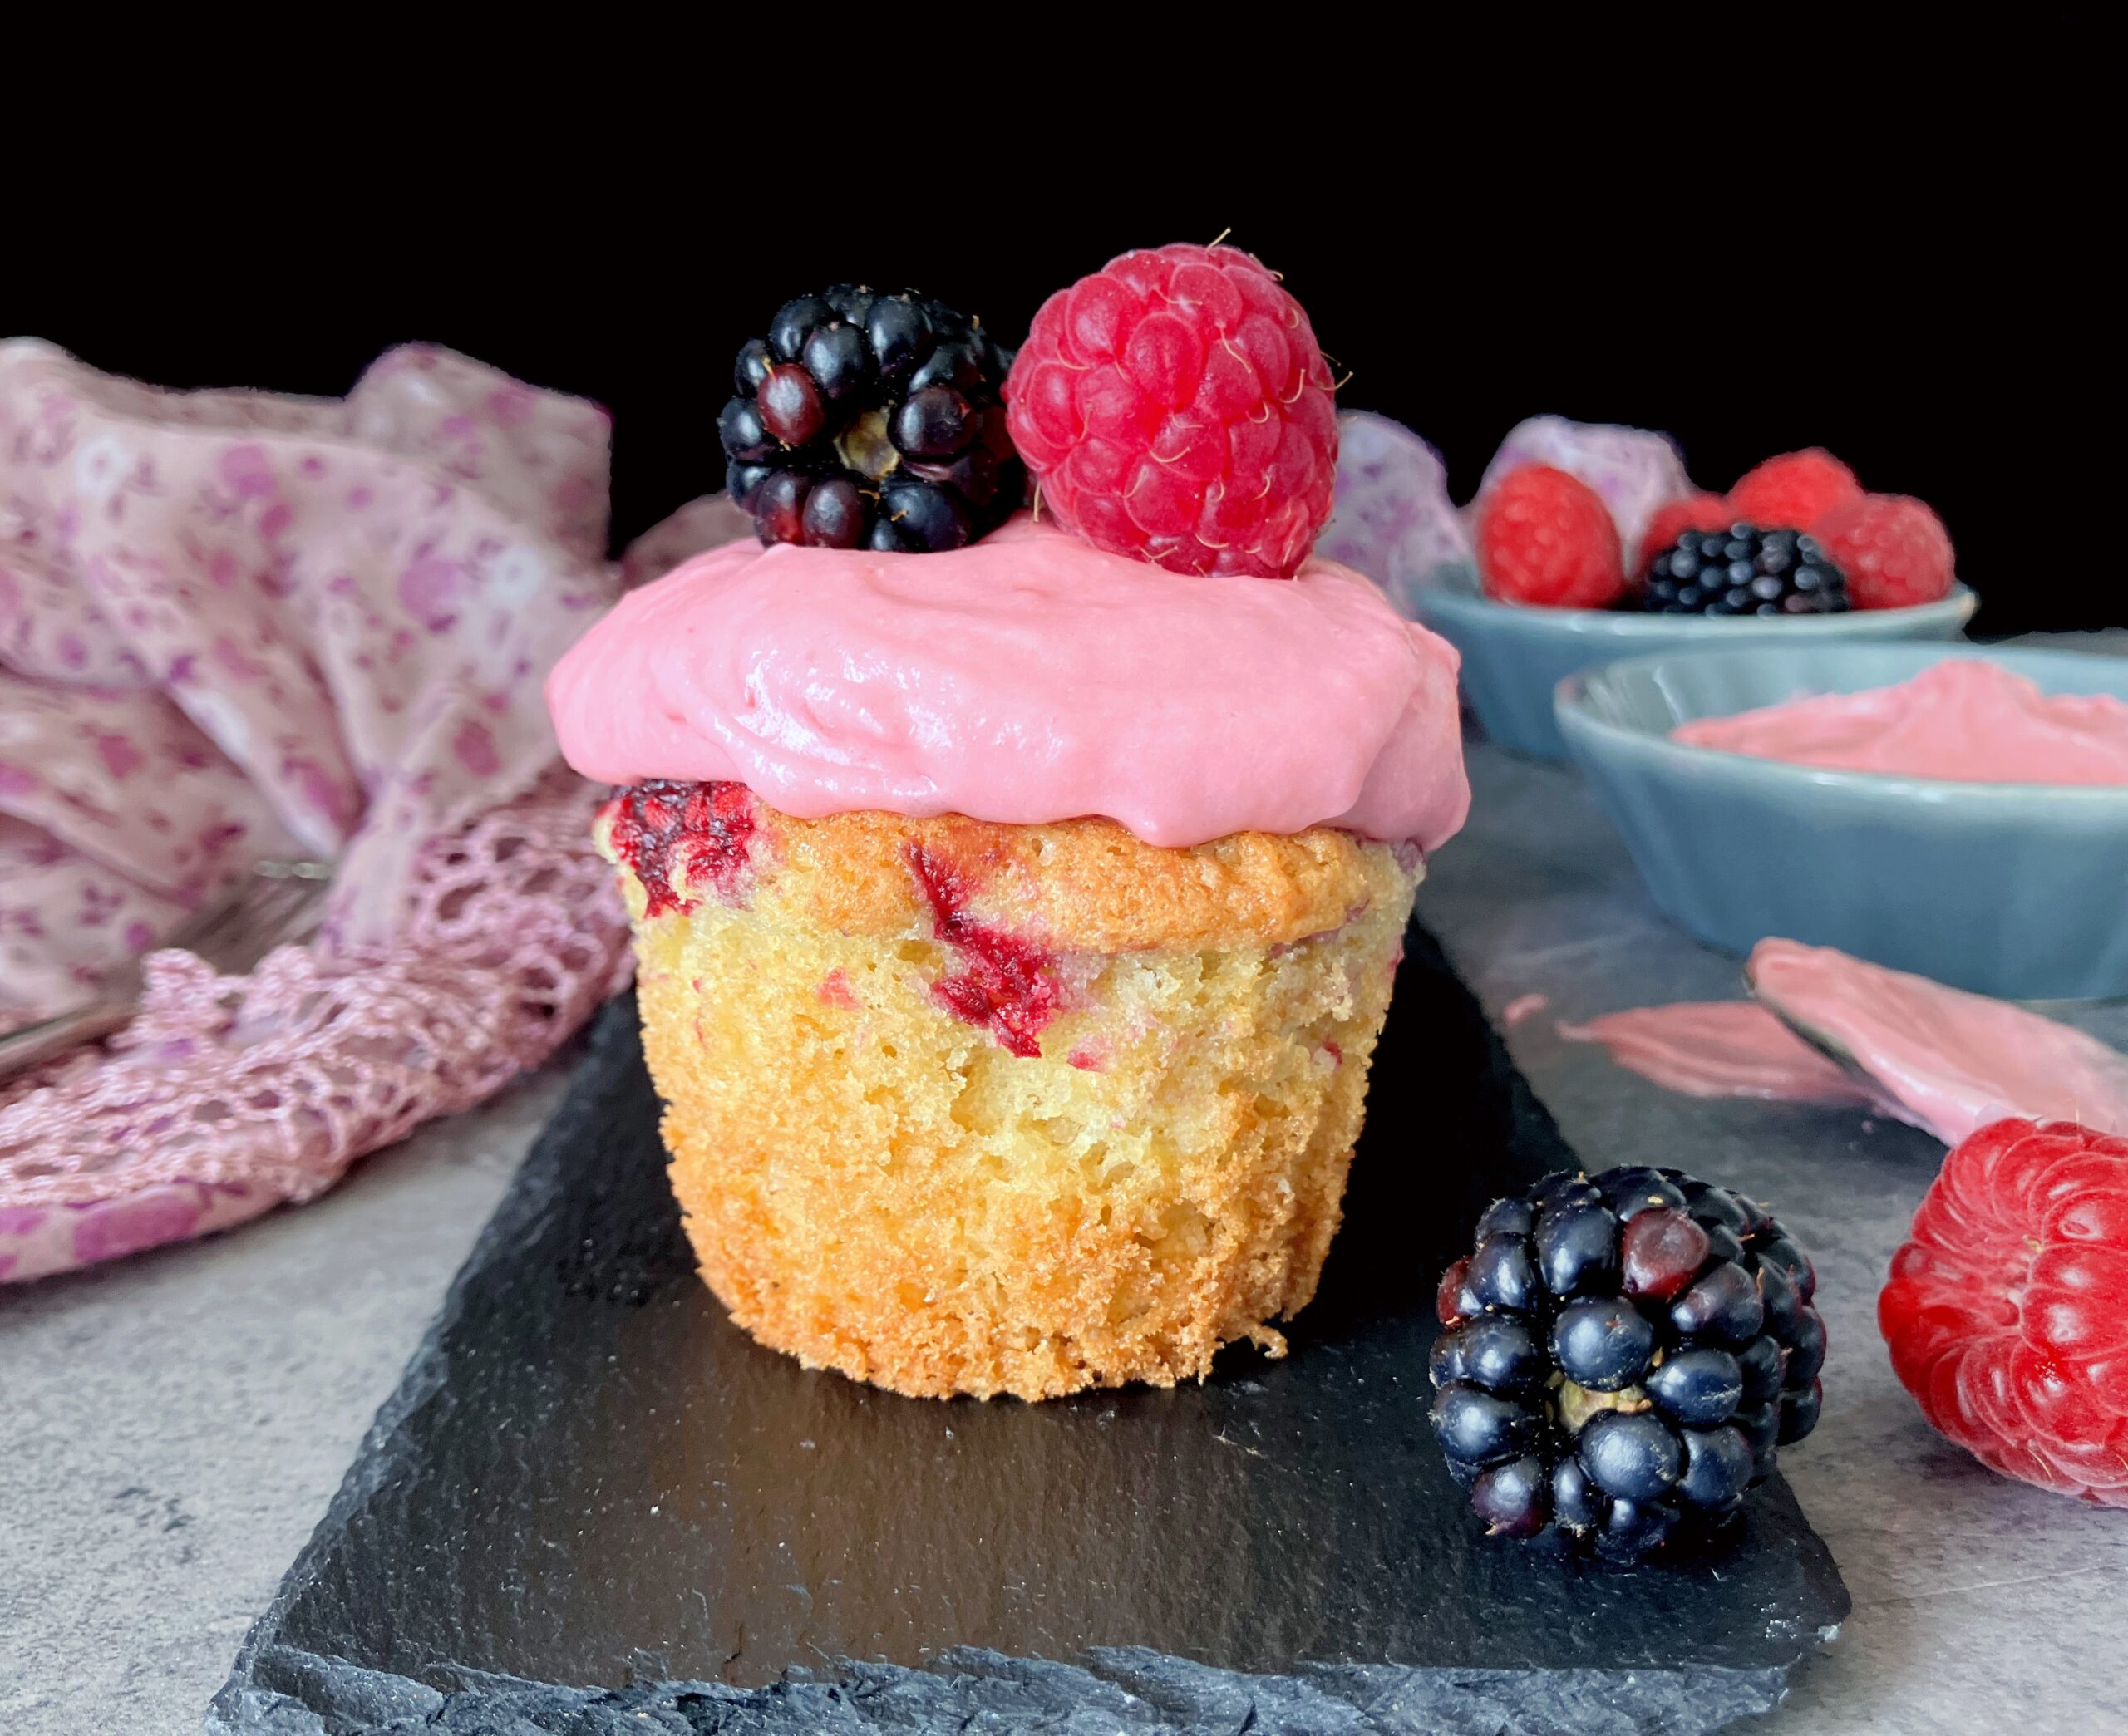 Cupcake with pink frosting topped with berries on a black slate with a pink cloth